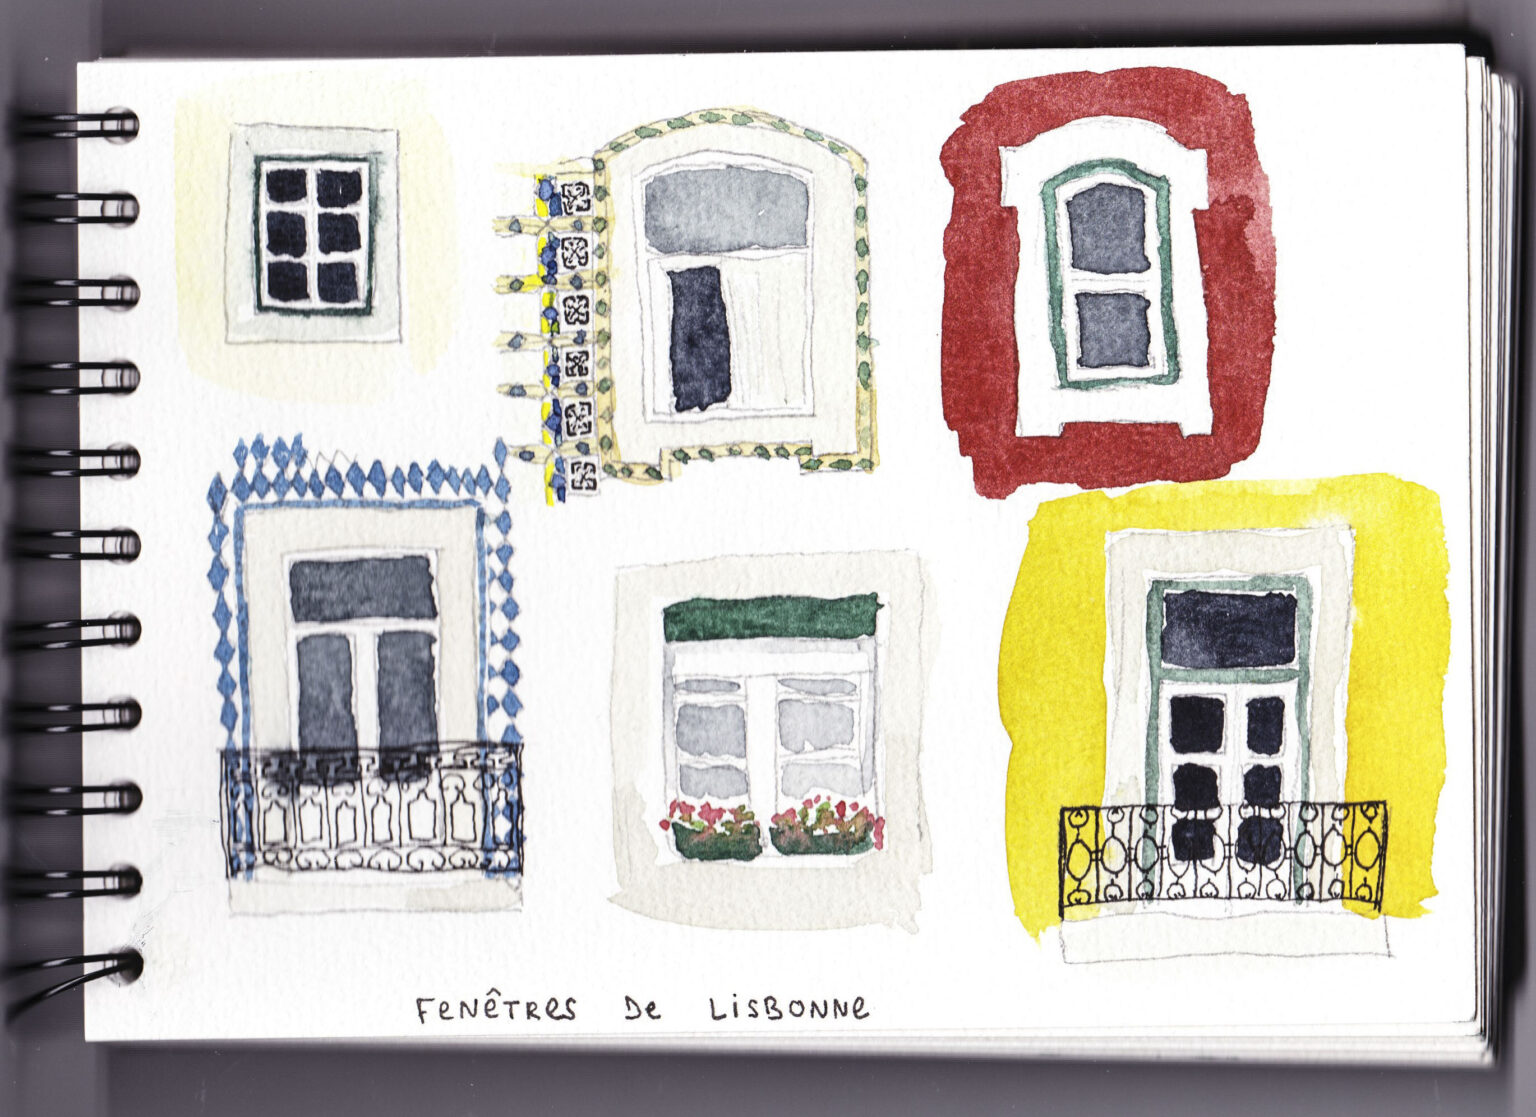 Several windows of Lisbon painted in watercolor